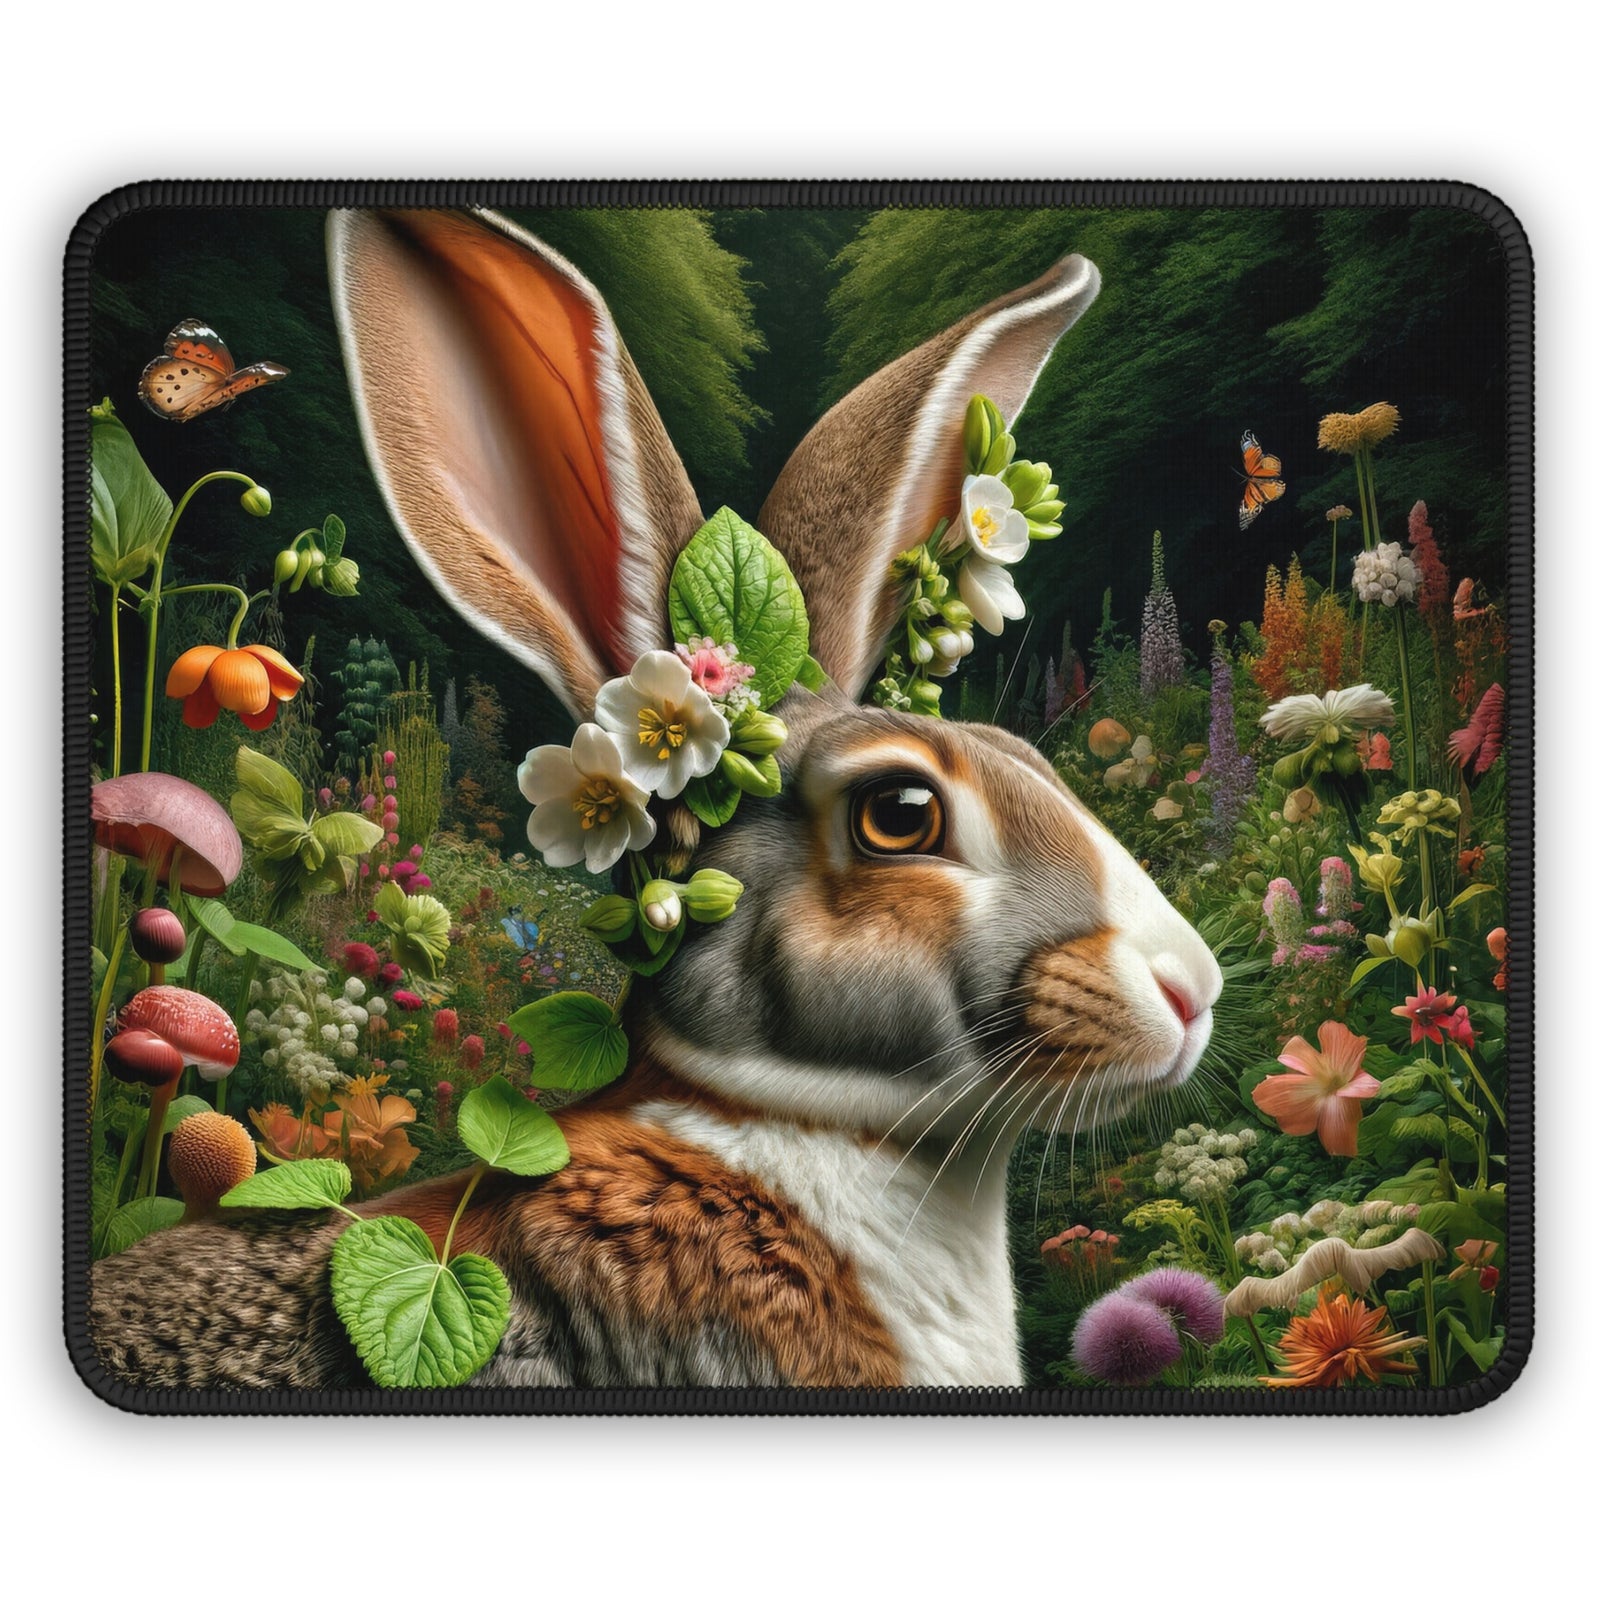 Blossom-Eared Sentinel of the Enchanted Garden Mouse Pad